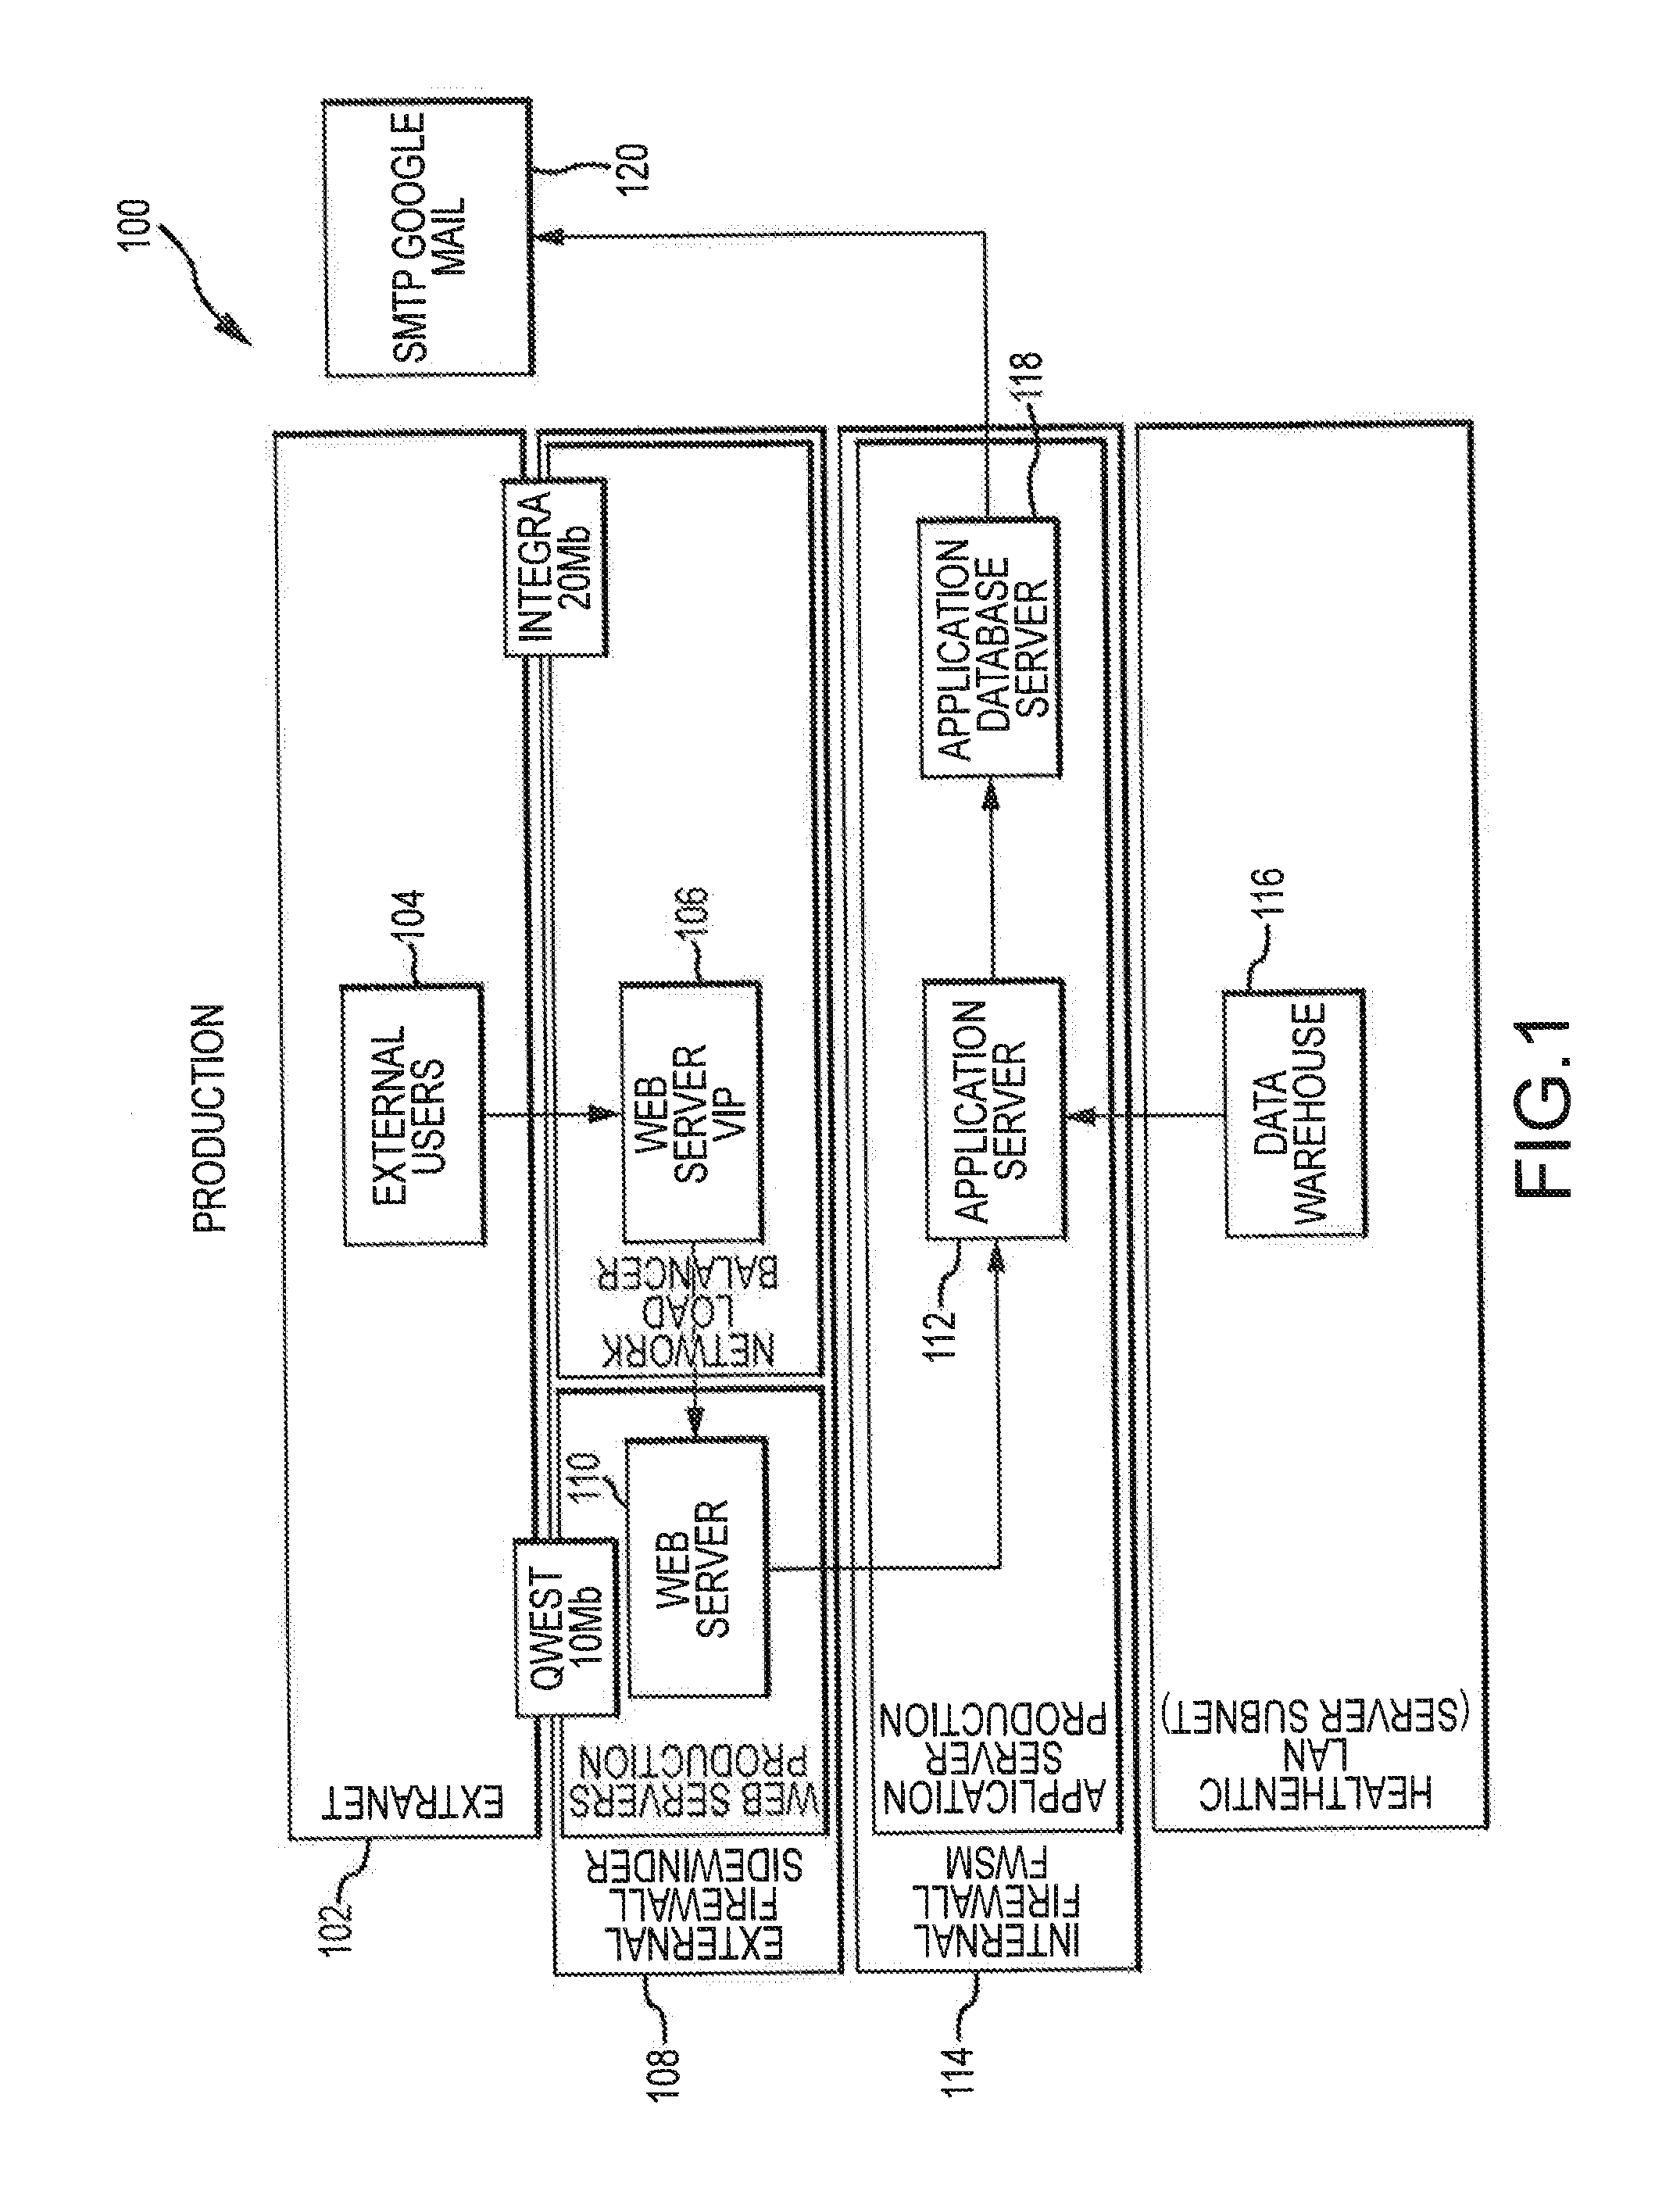 System and method for managing health risks